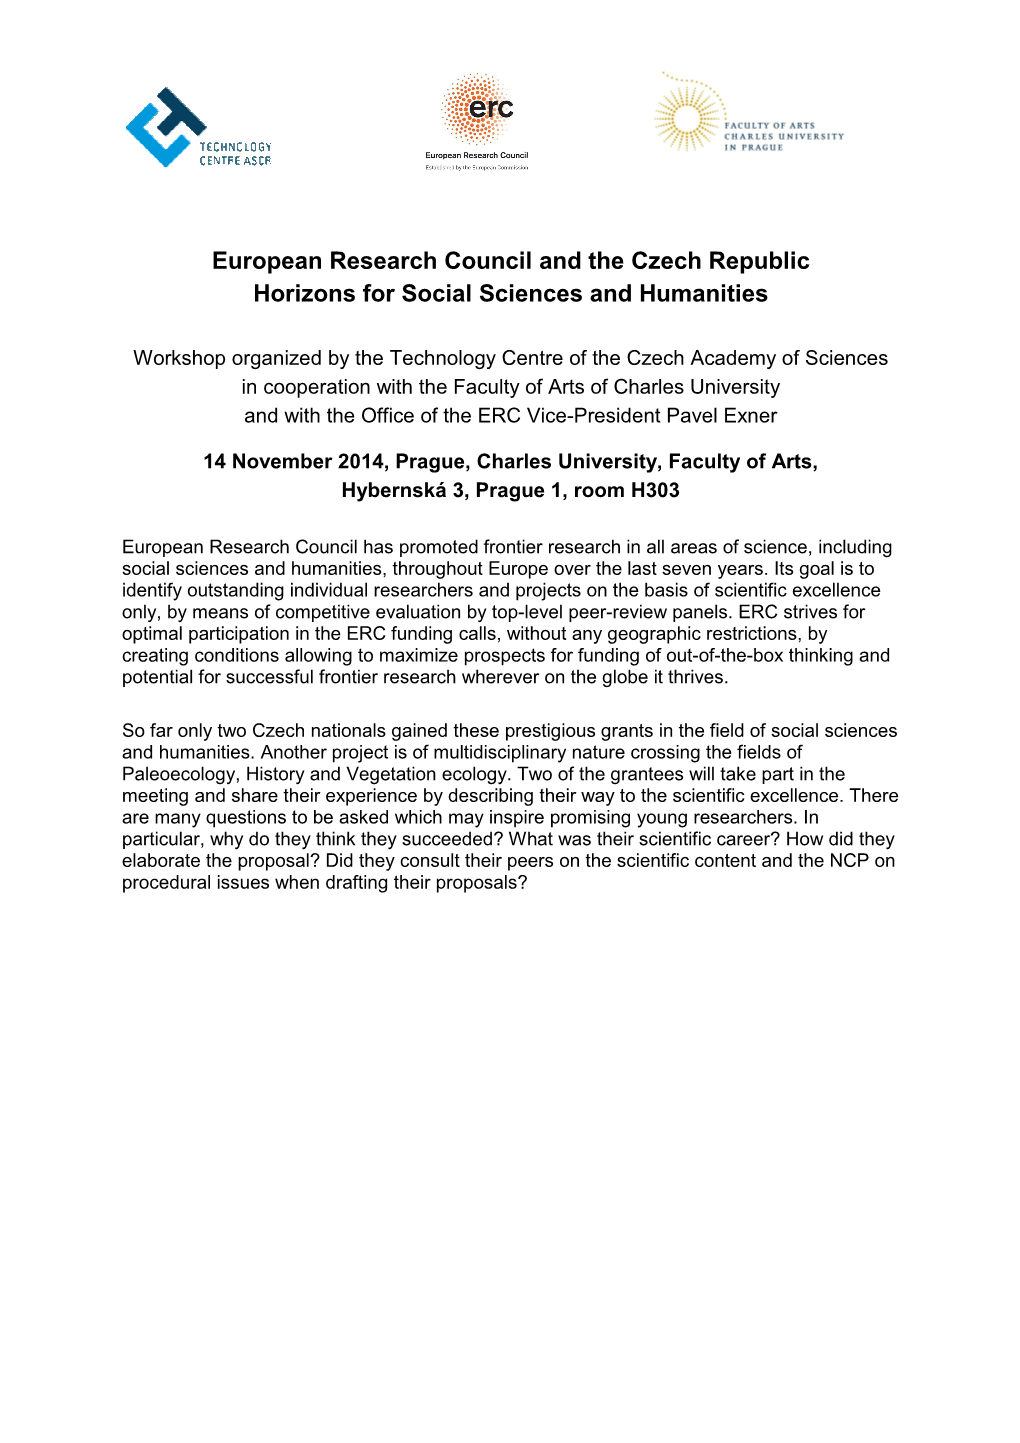 European Research Council and the Czech Republic Horizons for Social Sciences and Humanities